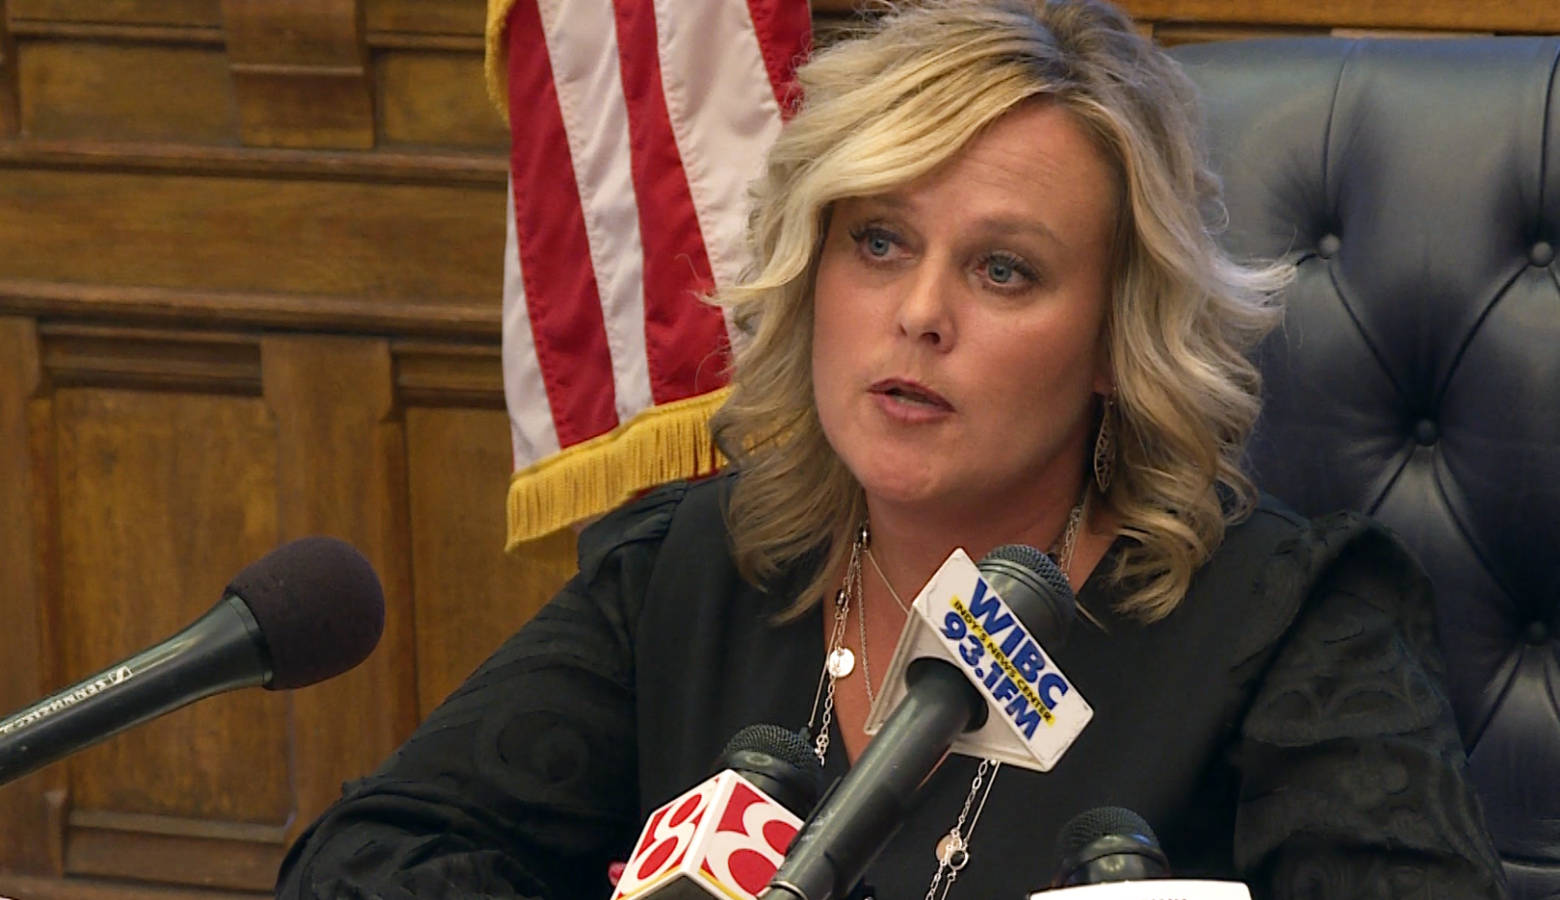 State Superintendent Jennifer McCormick outlines her department's 2019 legislative agenda – including school accountability, inclusive practices for schools receiving public funding, and teacher licensure. (Jeanie Lindsay/IPB News)